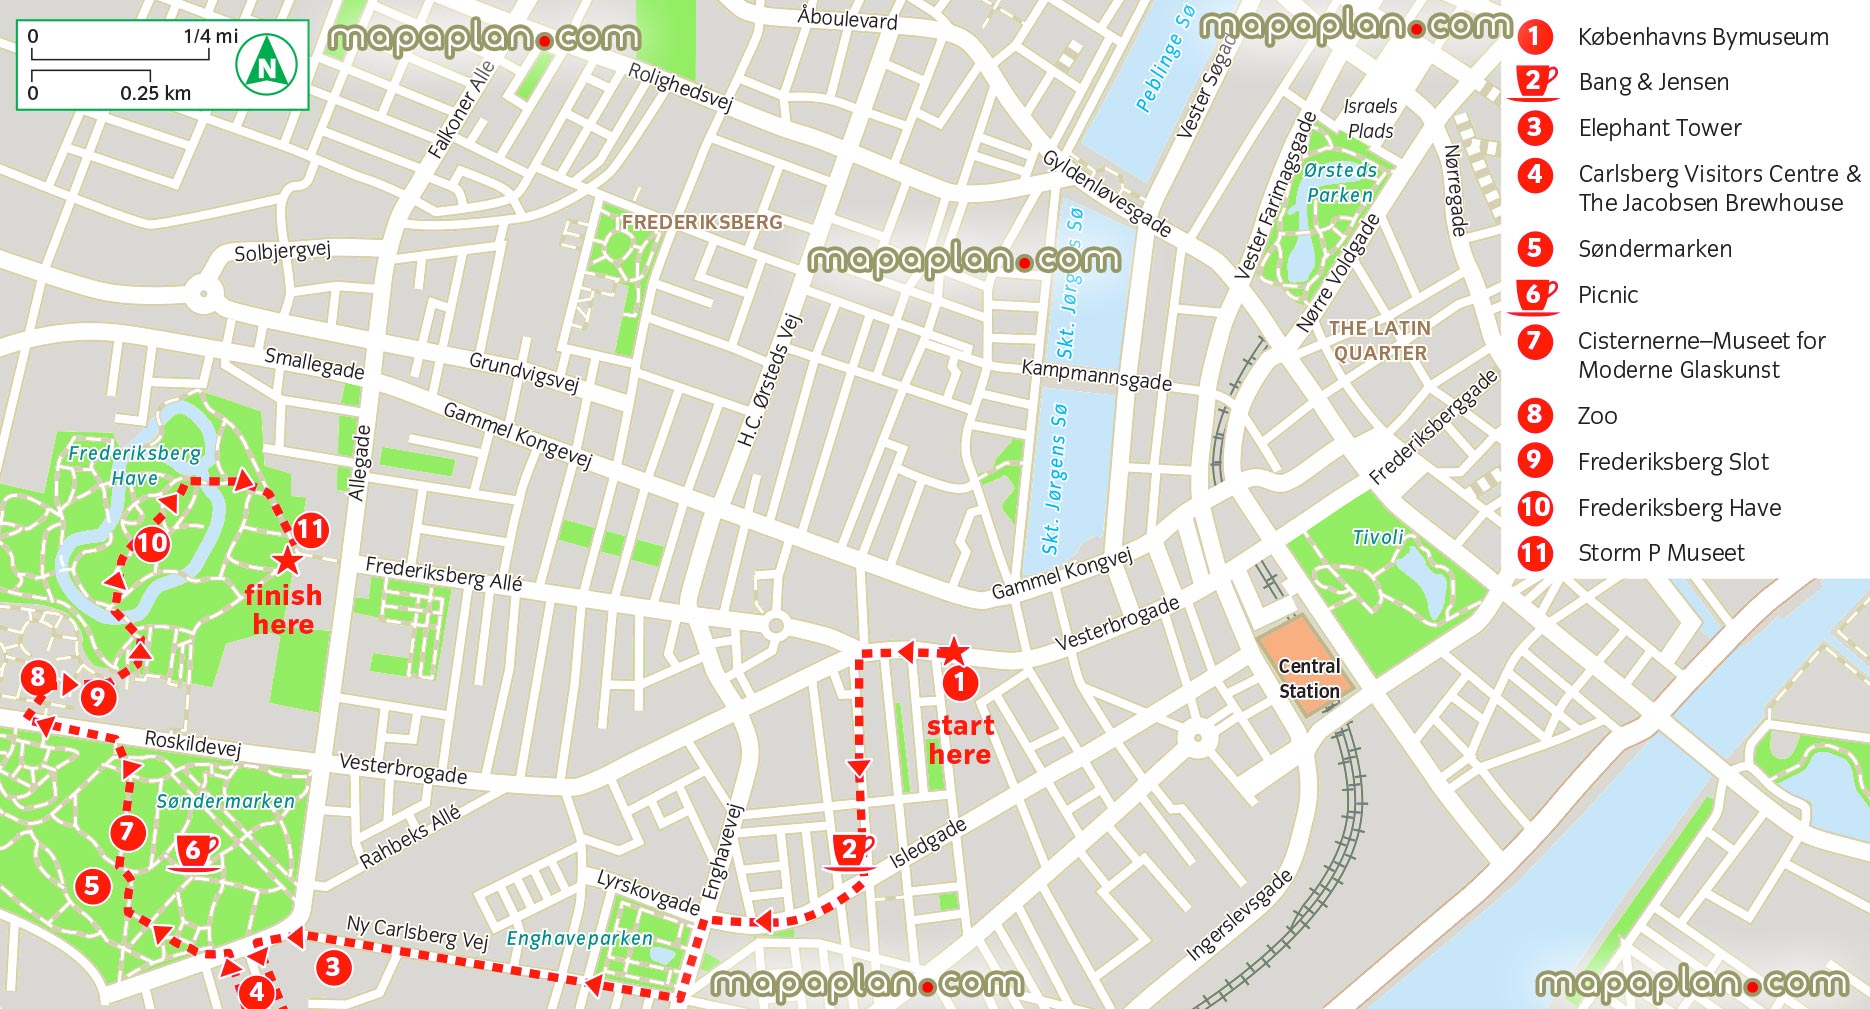 vesterbro frederiksberg walk interactive itinerary planner list top things visit see central stations Copenhagen Top tourist attractions map